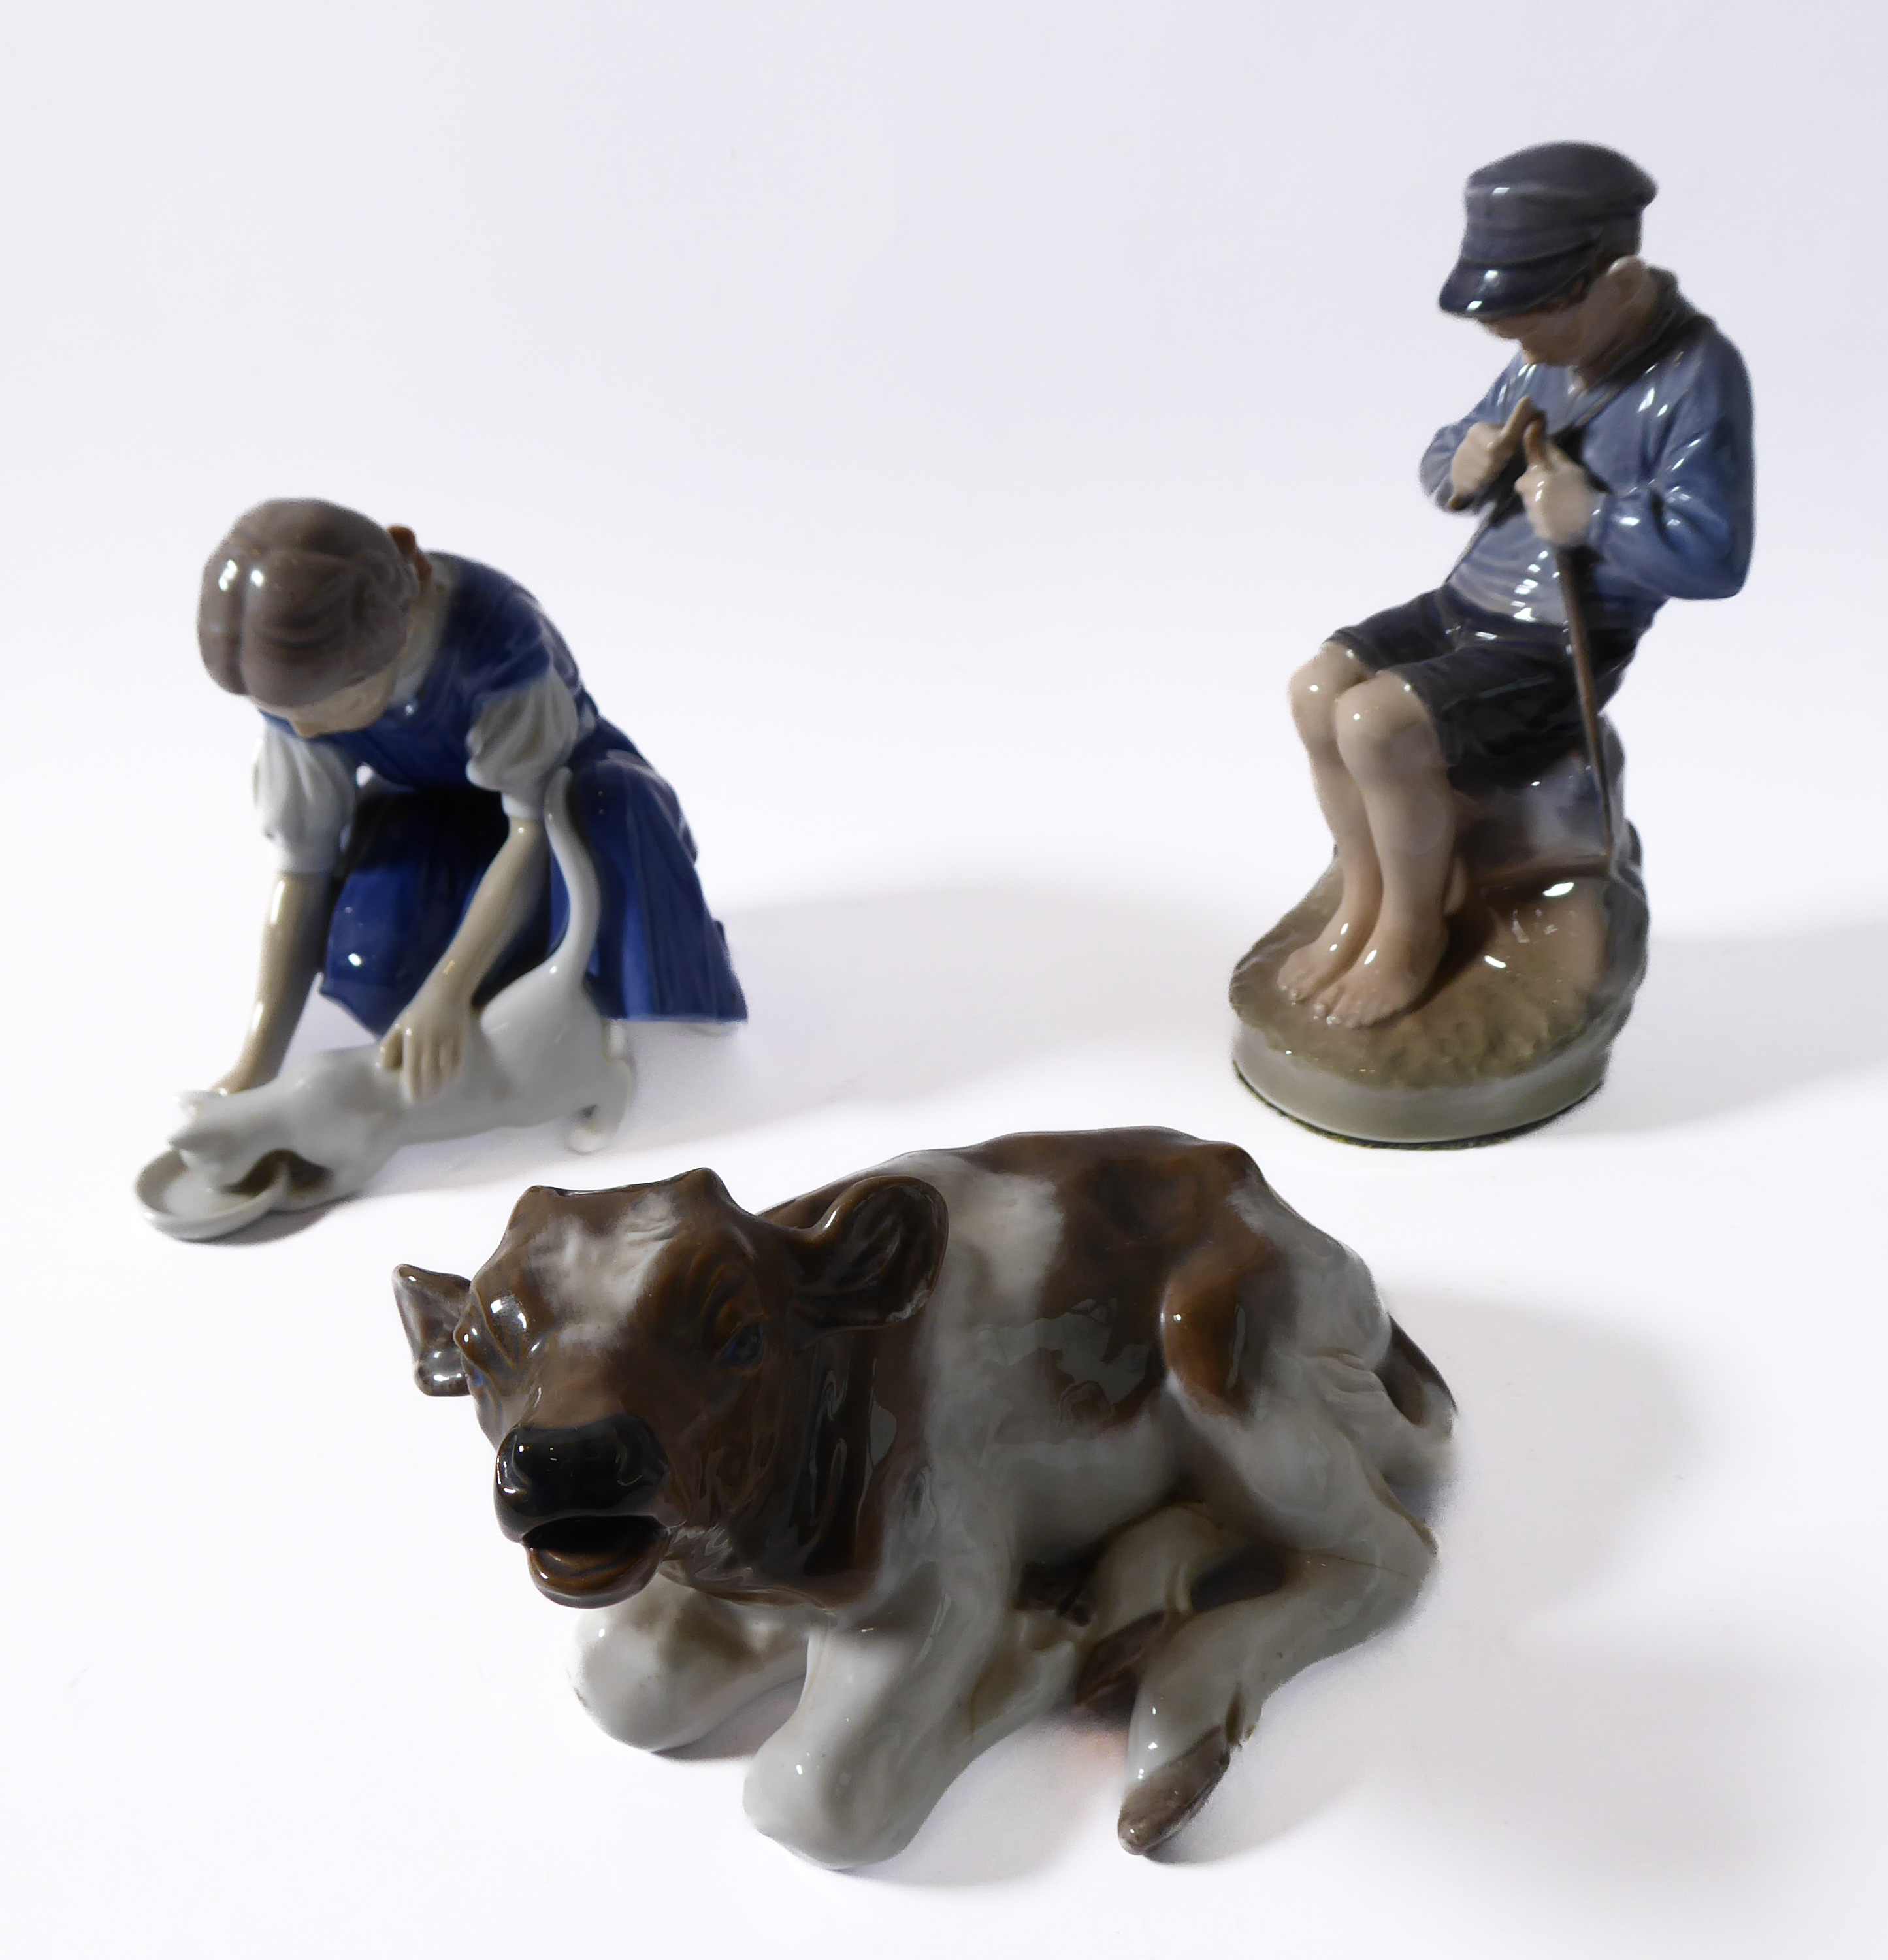 Royal Copenhagen porcelain figure group (mid 20th century, Danish factory), a seated young boy